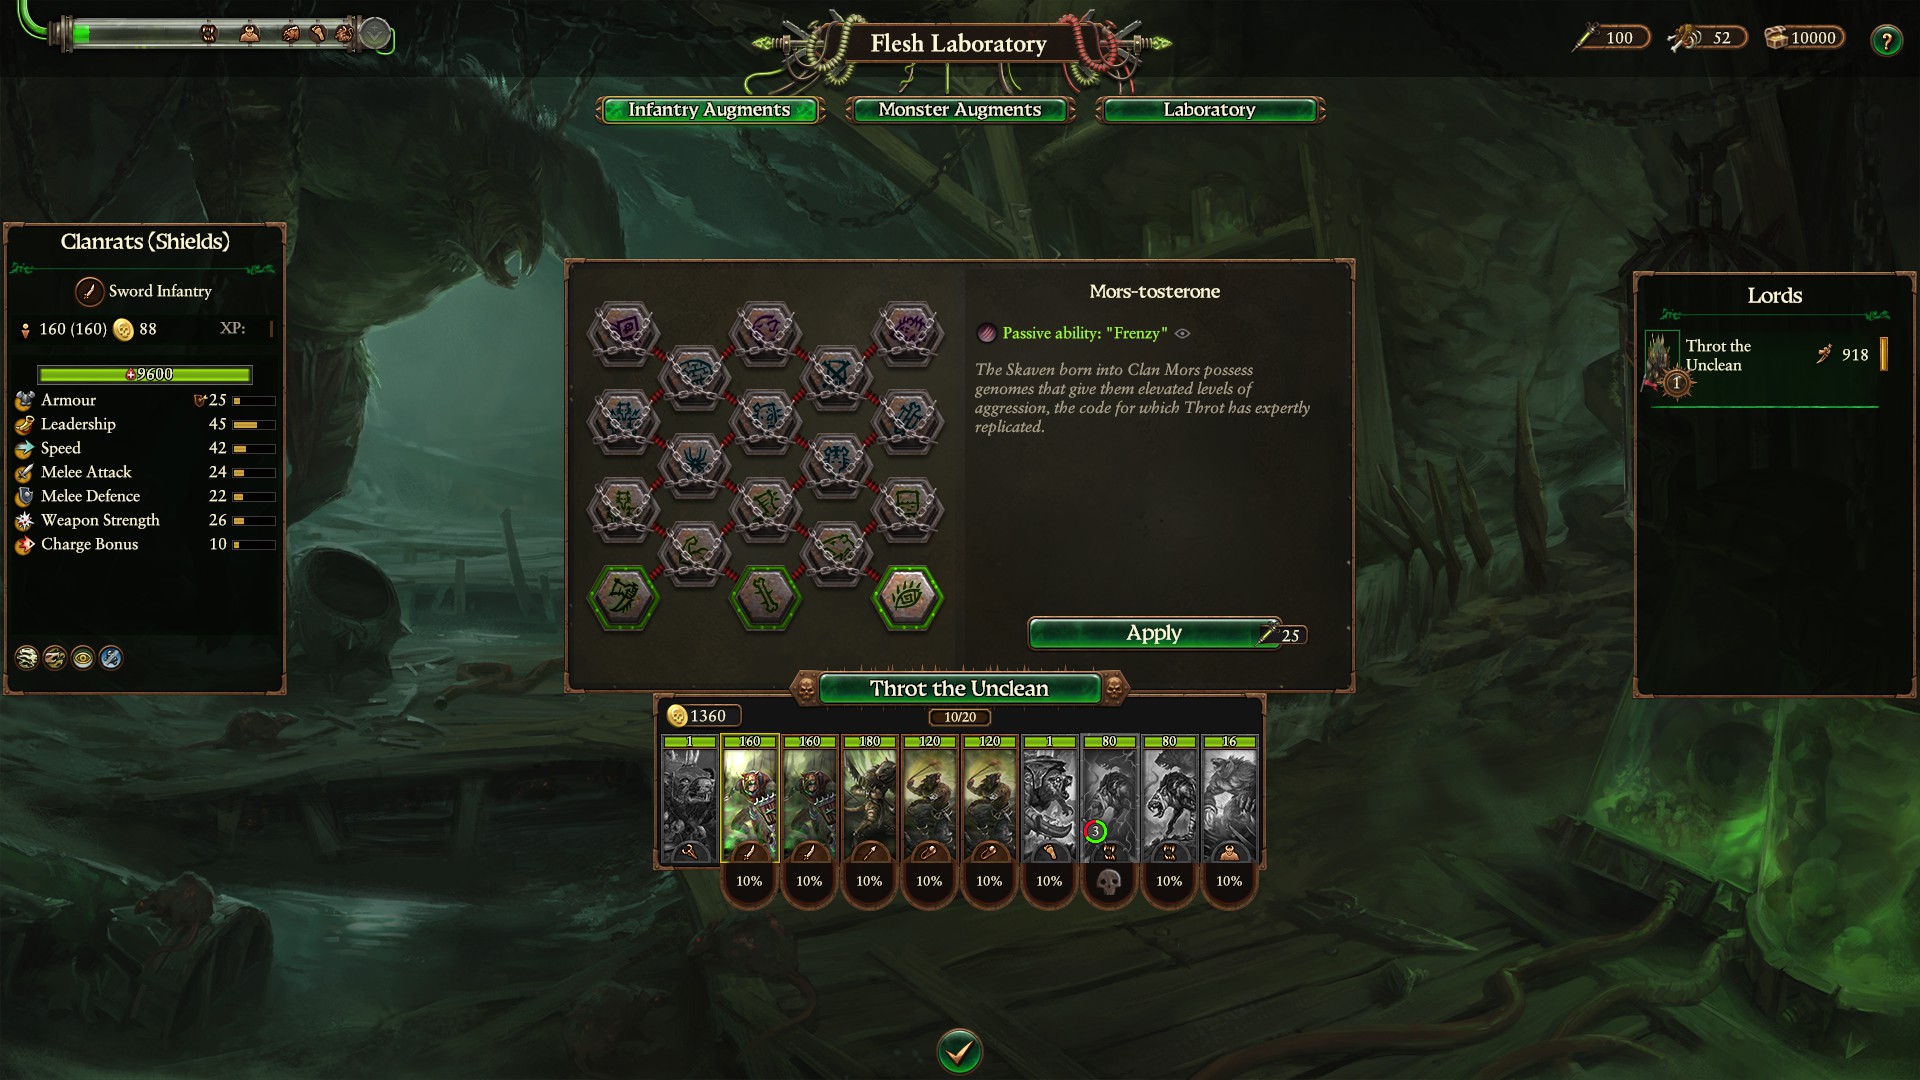 Total War: Warhammer 3 Immortal Empires Throt - Skaven campaign overview, guide and second thoughts image 6